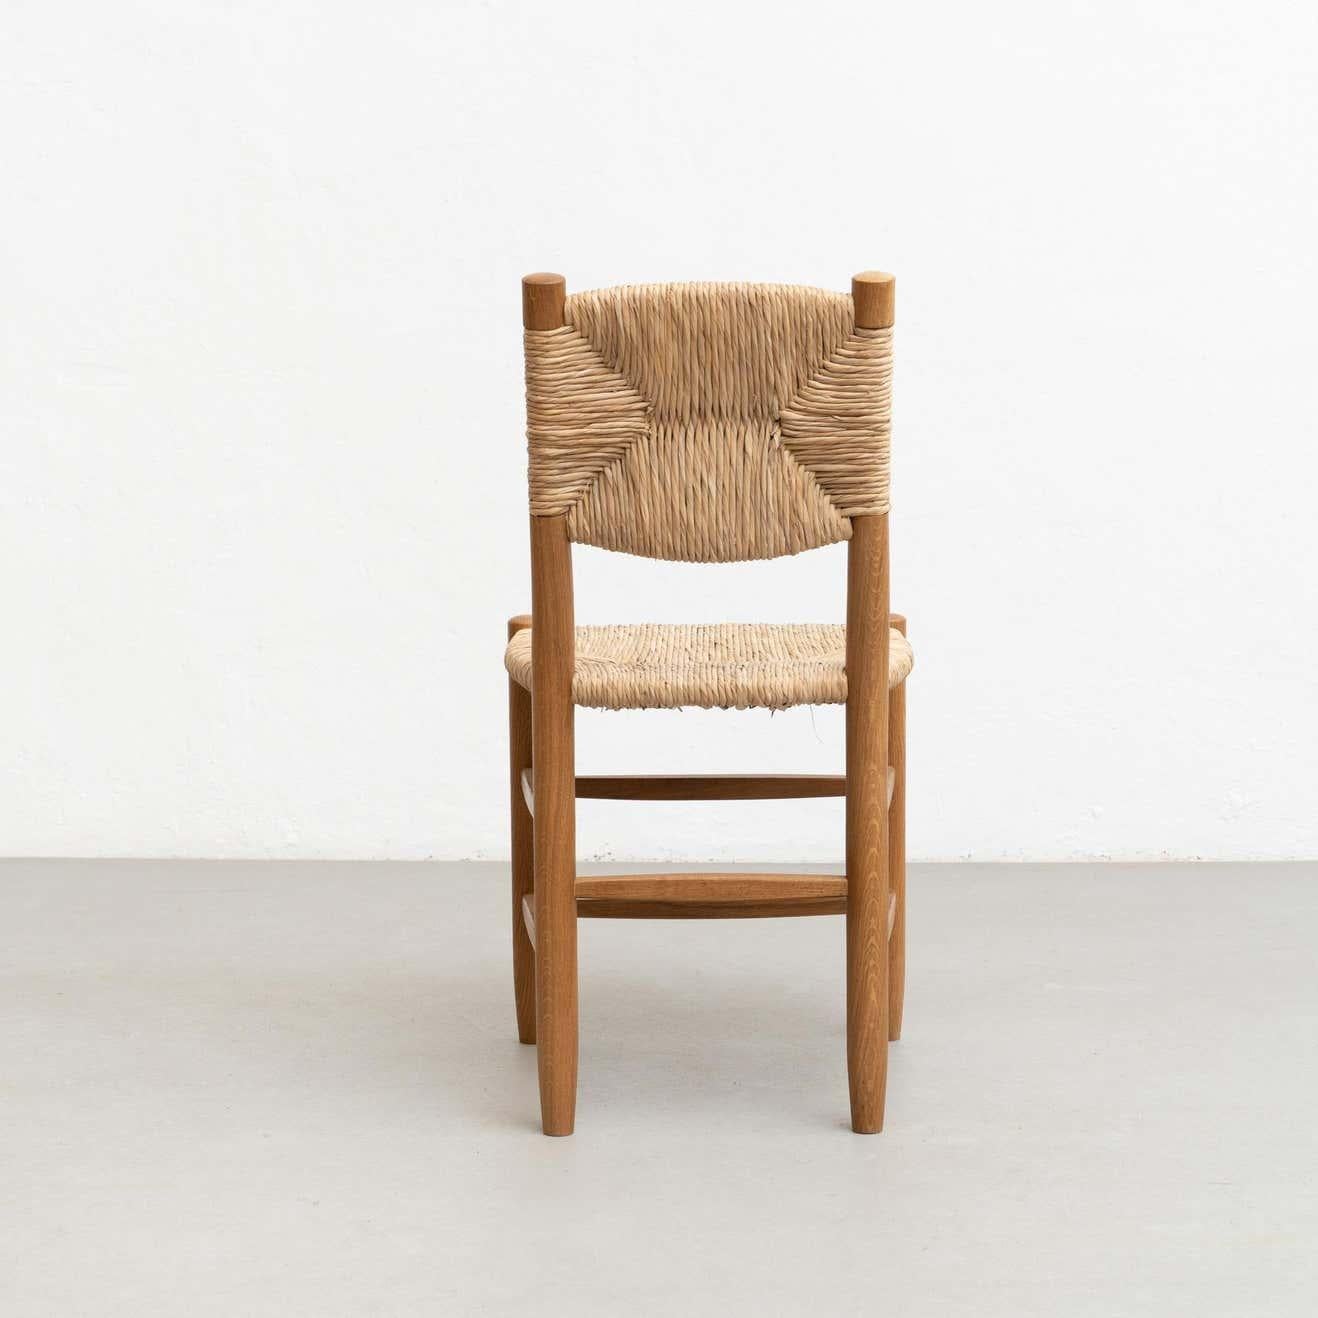 Set of Six After Charlotte Perriand N.19 Chairs, Wood Rattan, Mid-Century Modern For Sale 14